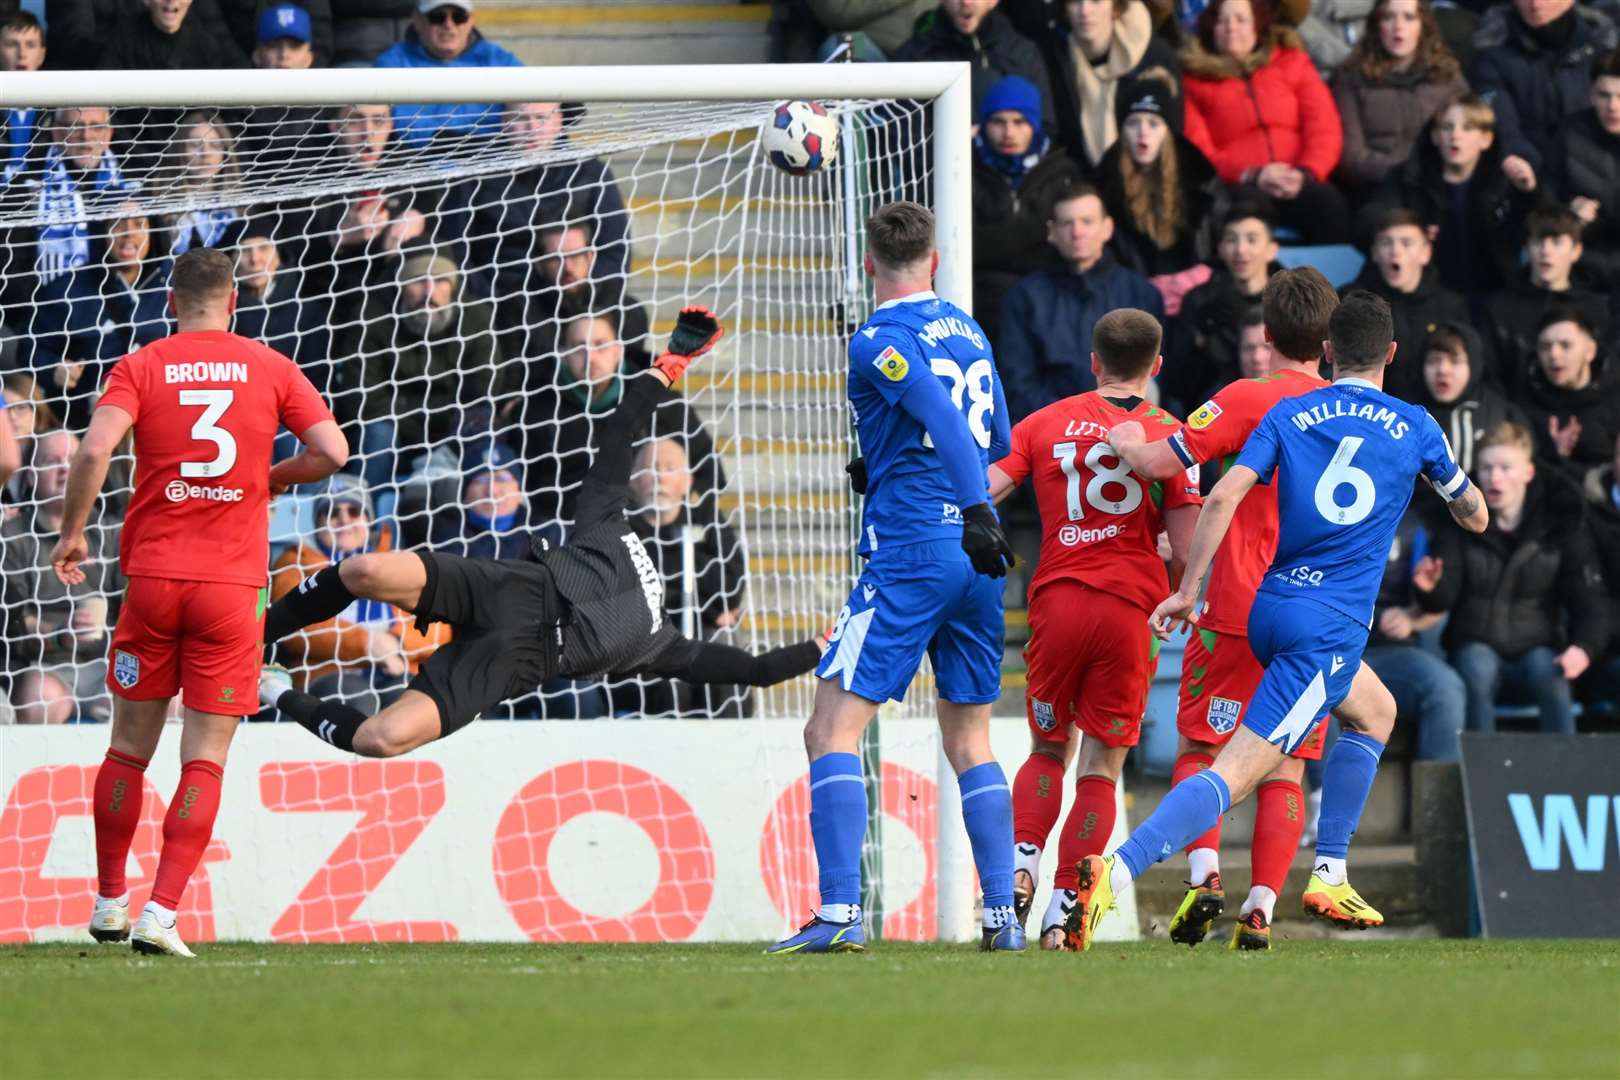 Shaun Williams' header is saved before Max Ehmer scores for Gillingham Picture : Keith Gillard